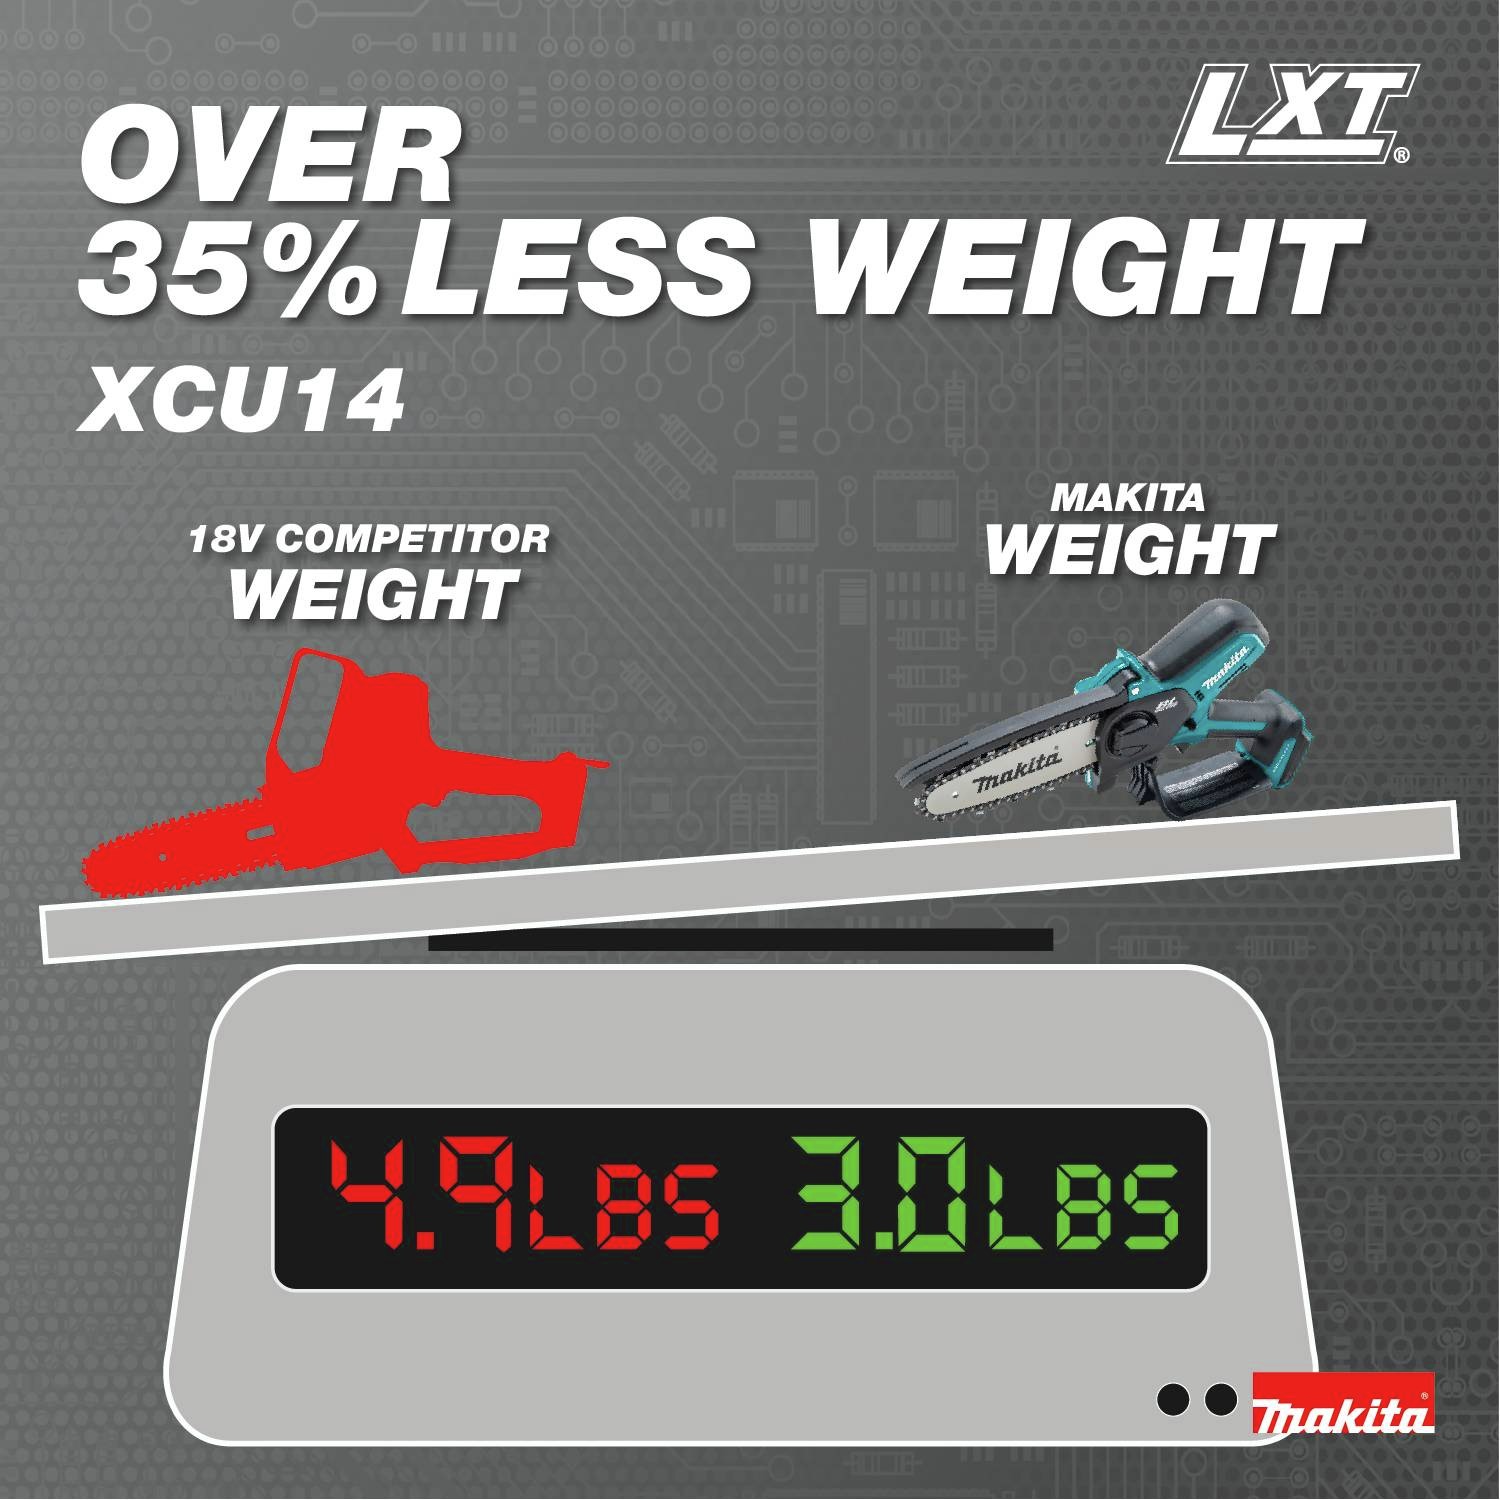 Over 35% Less Weight: 18V competitor weight 4.9 lbs. vs Makita weight 3.0 lbs.